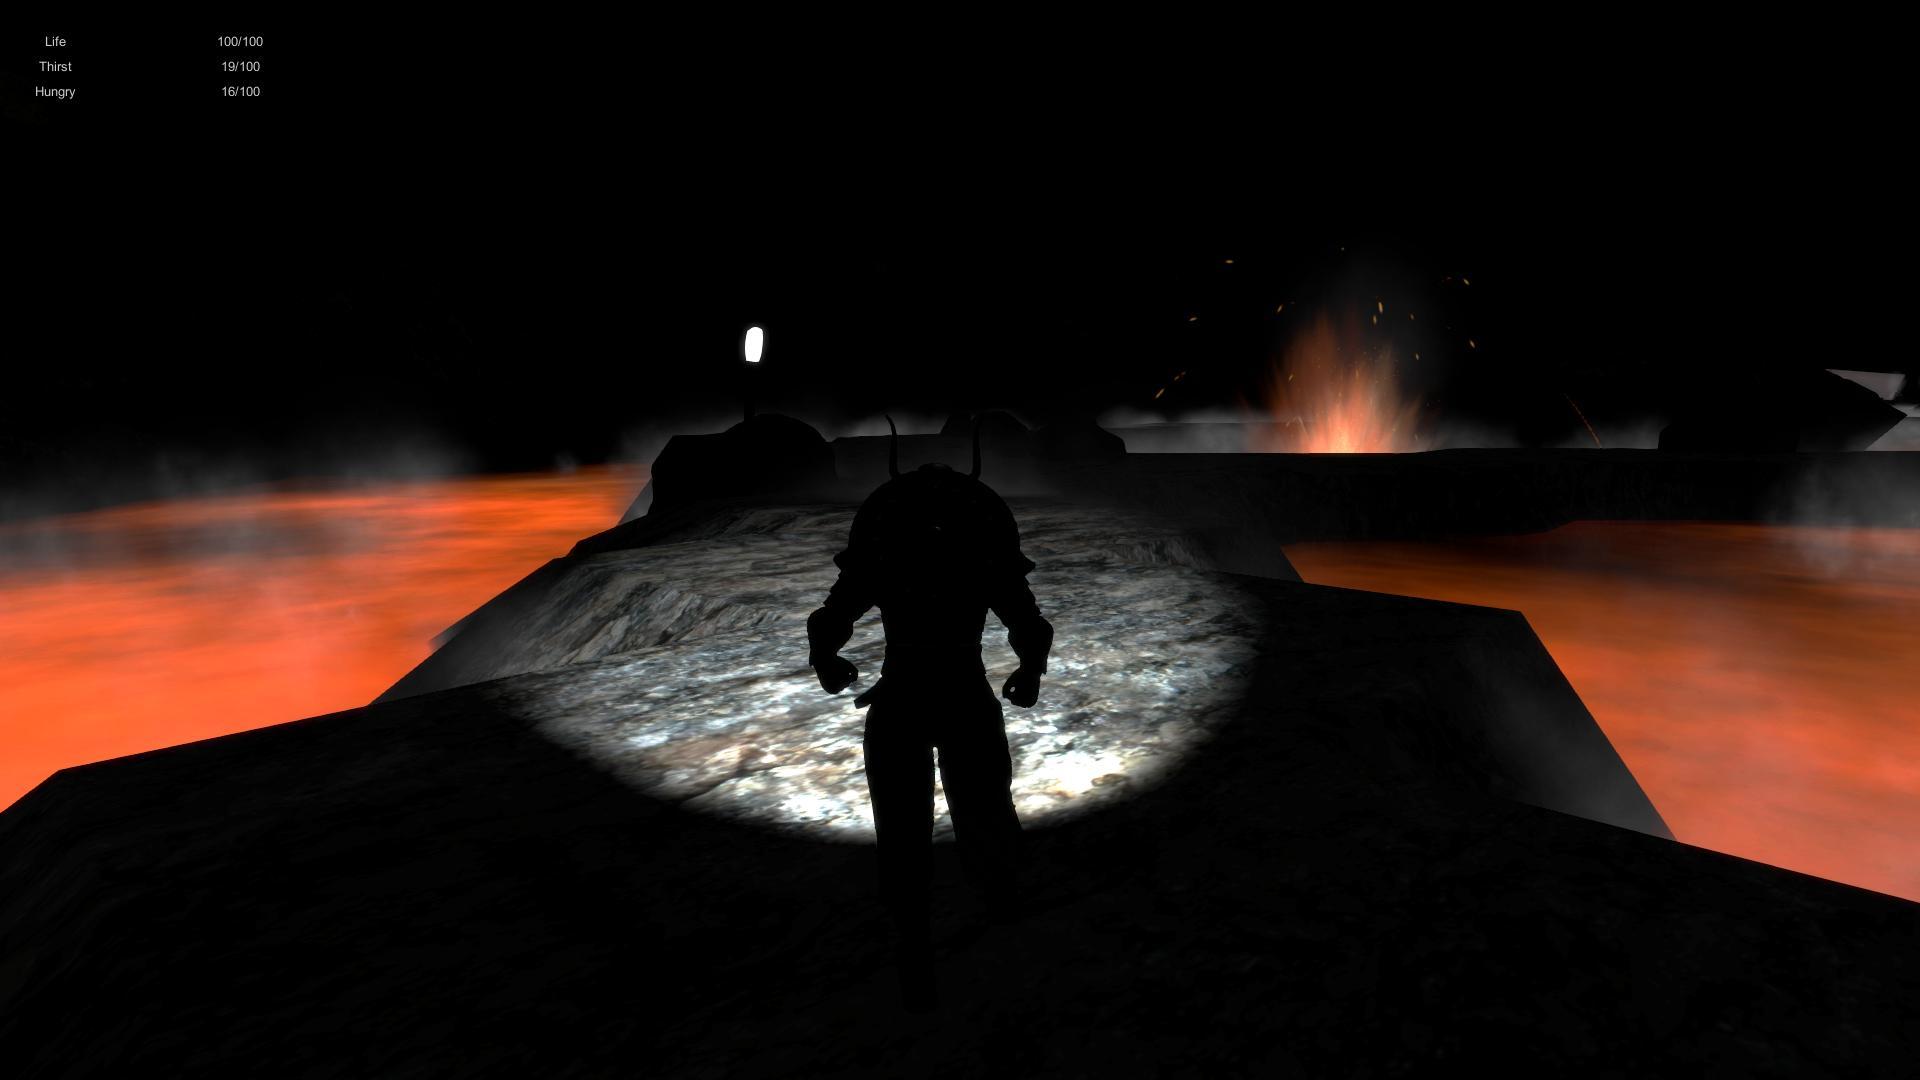 Screenshot №10 from game The Last Hope